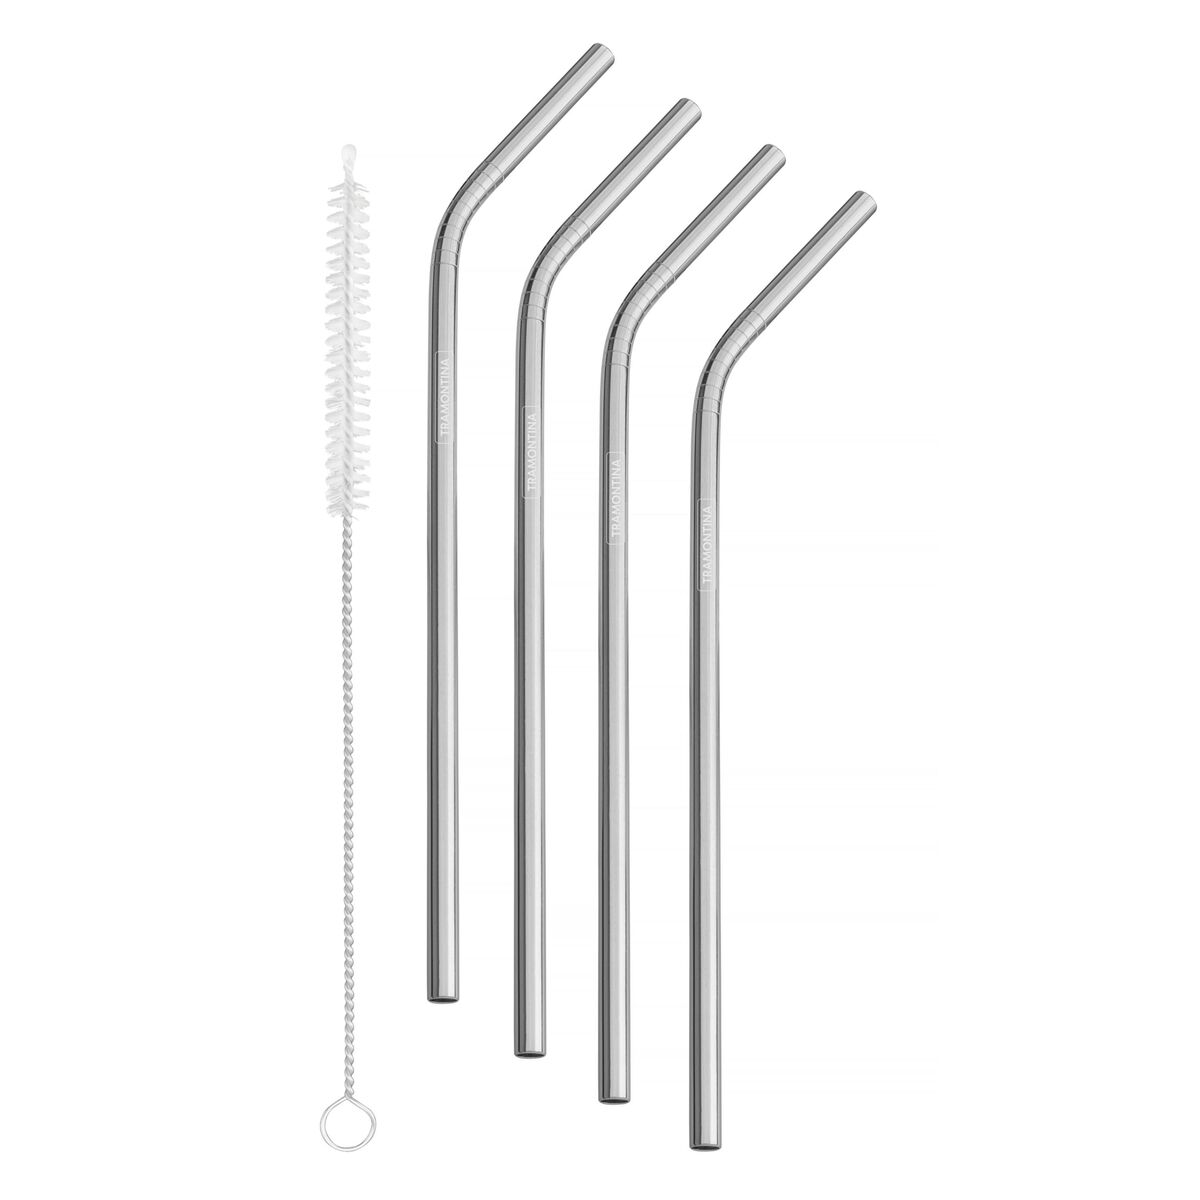 Tramontina stainless steel drinking straw set with cleaning brush, 5 pc set